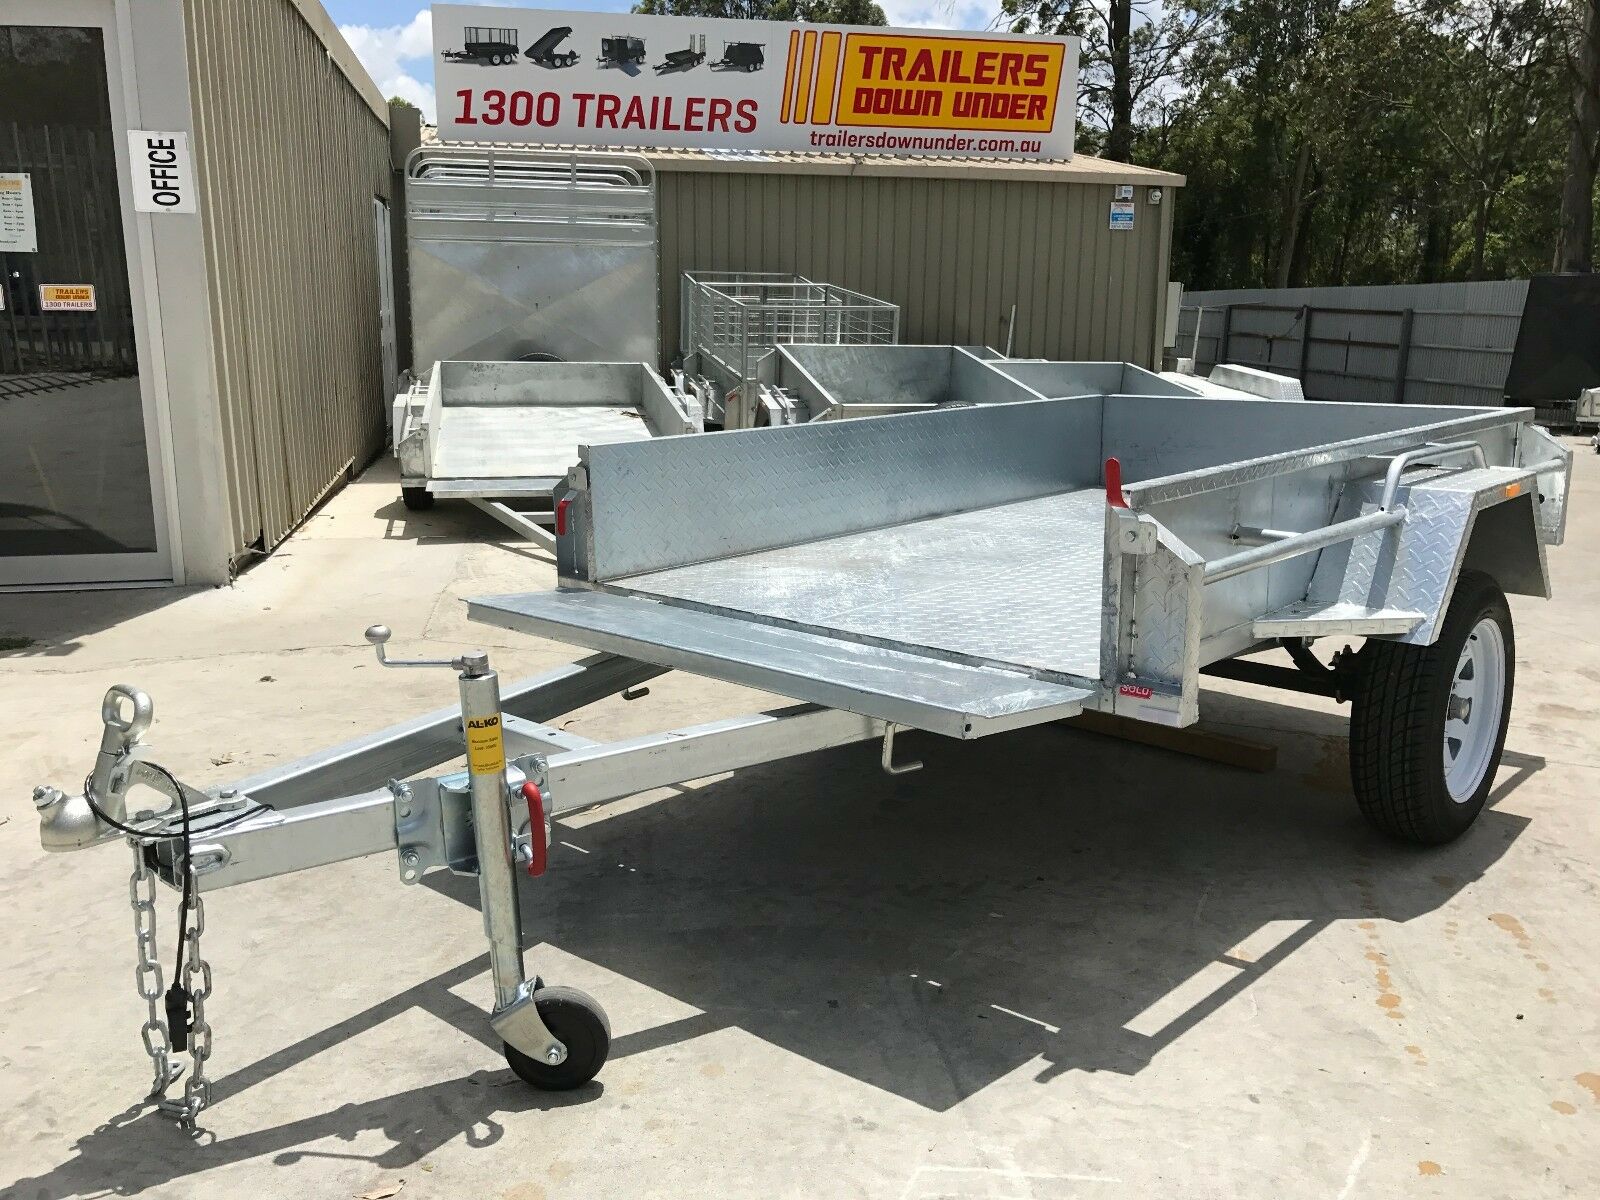 7×4 Galvanised Trailer with Full Checker Plate, Tilt Function Single Axle Galvanised Box Trailer For Sale – Brisbane<br><br><span class="galv-import">Imported Trailer</span>